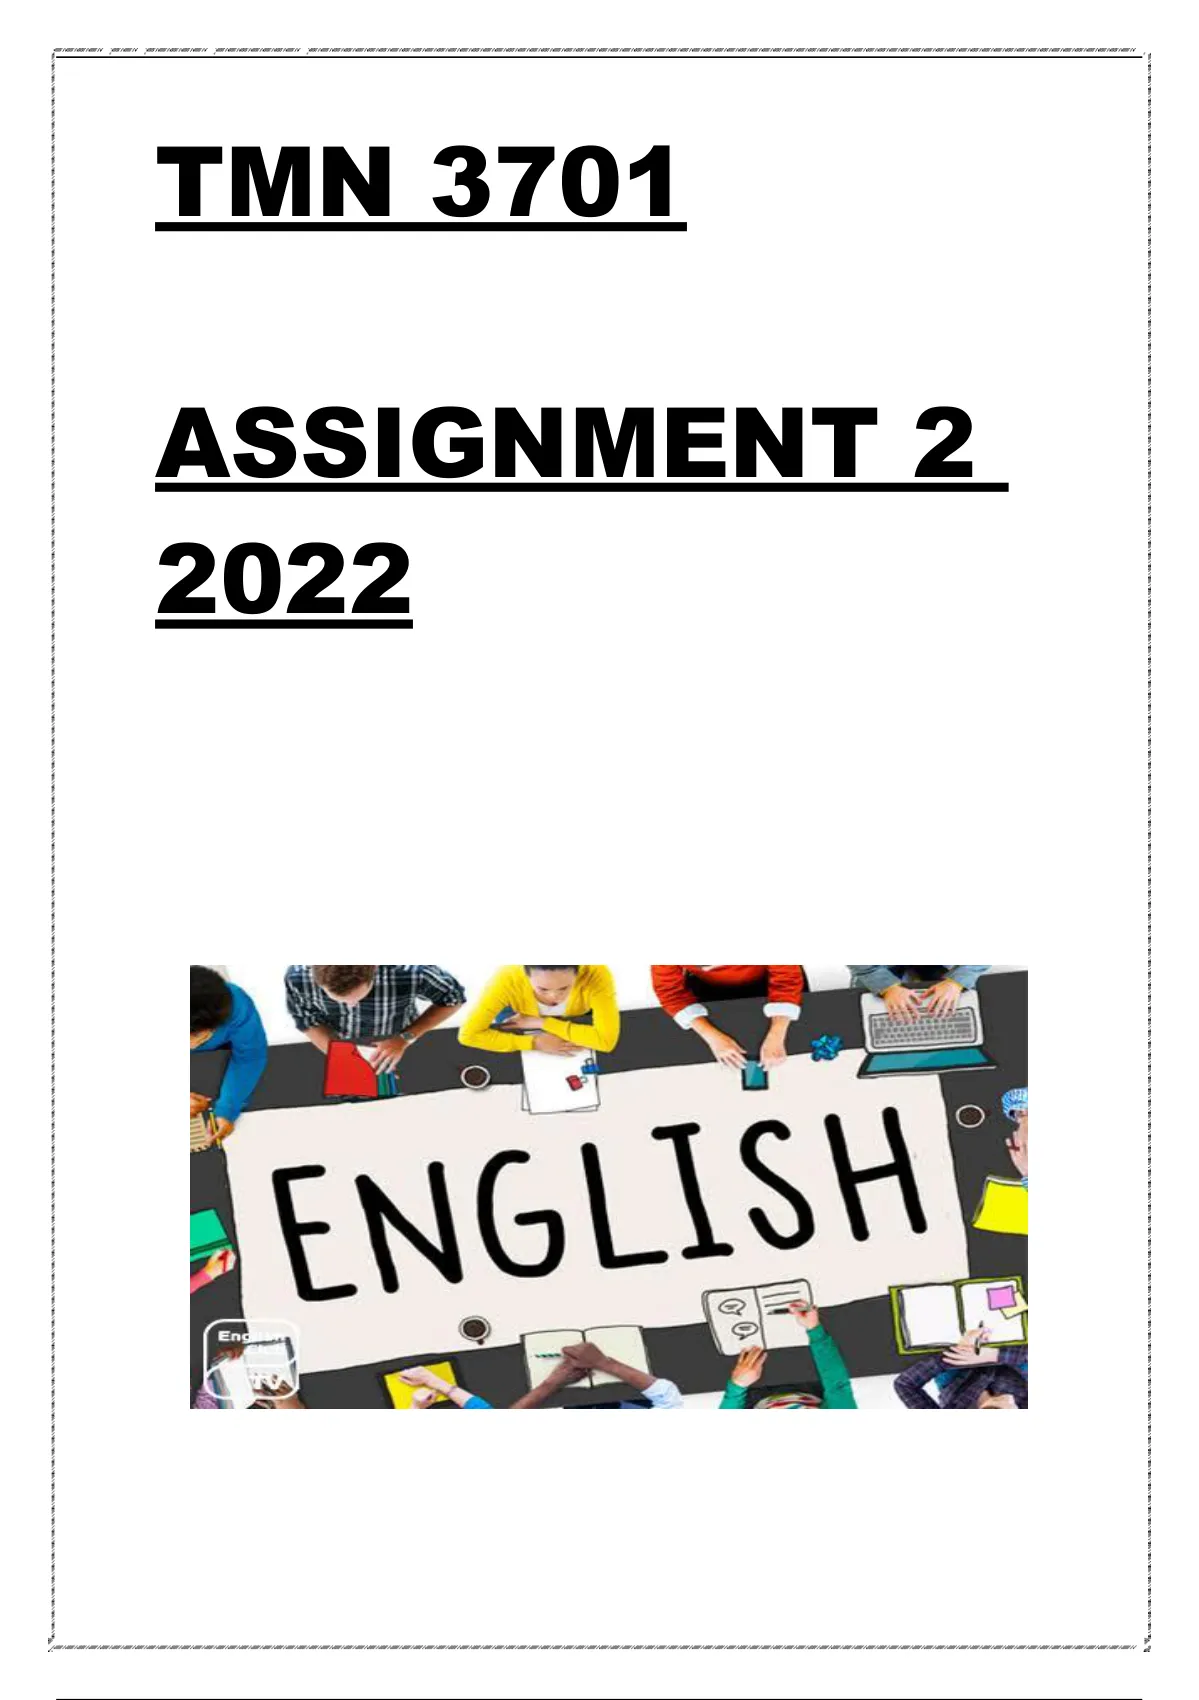 tmn3701 assignment 2 answers 2023